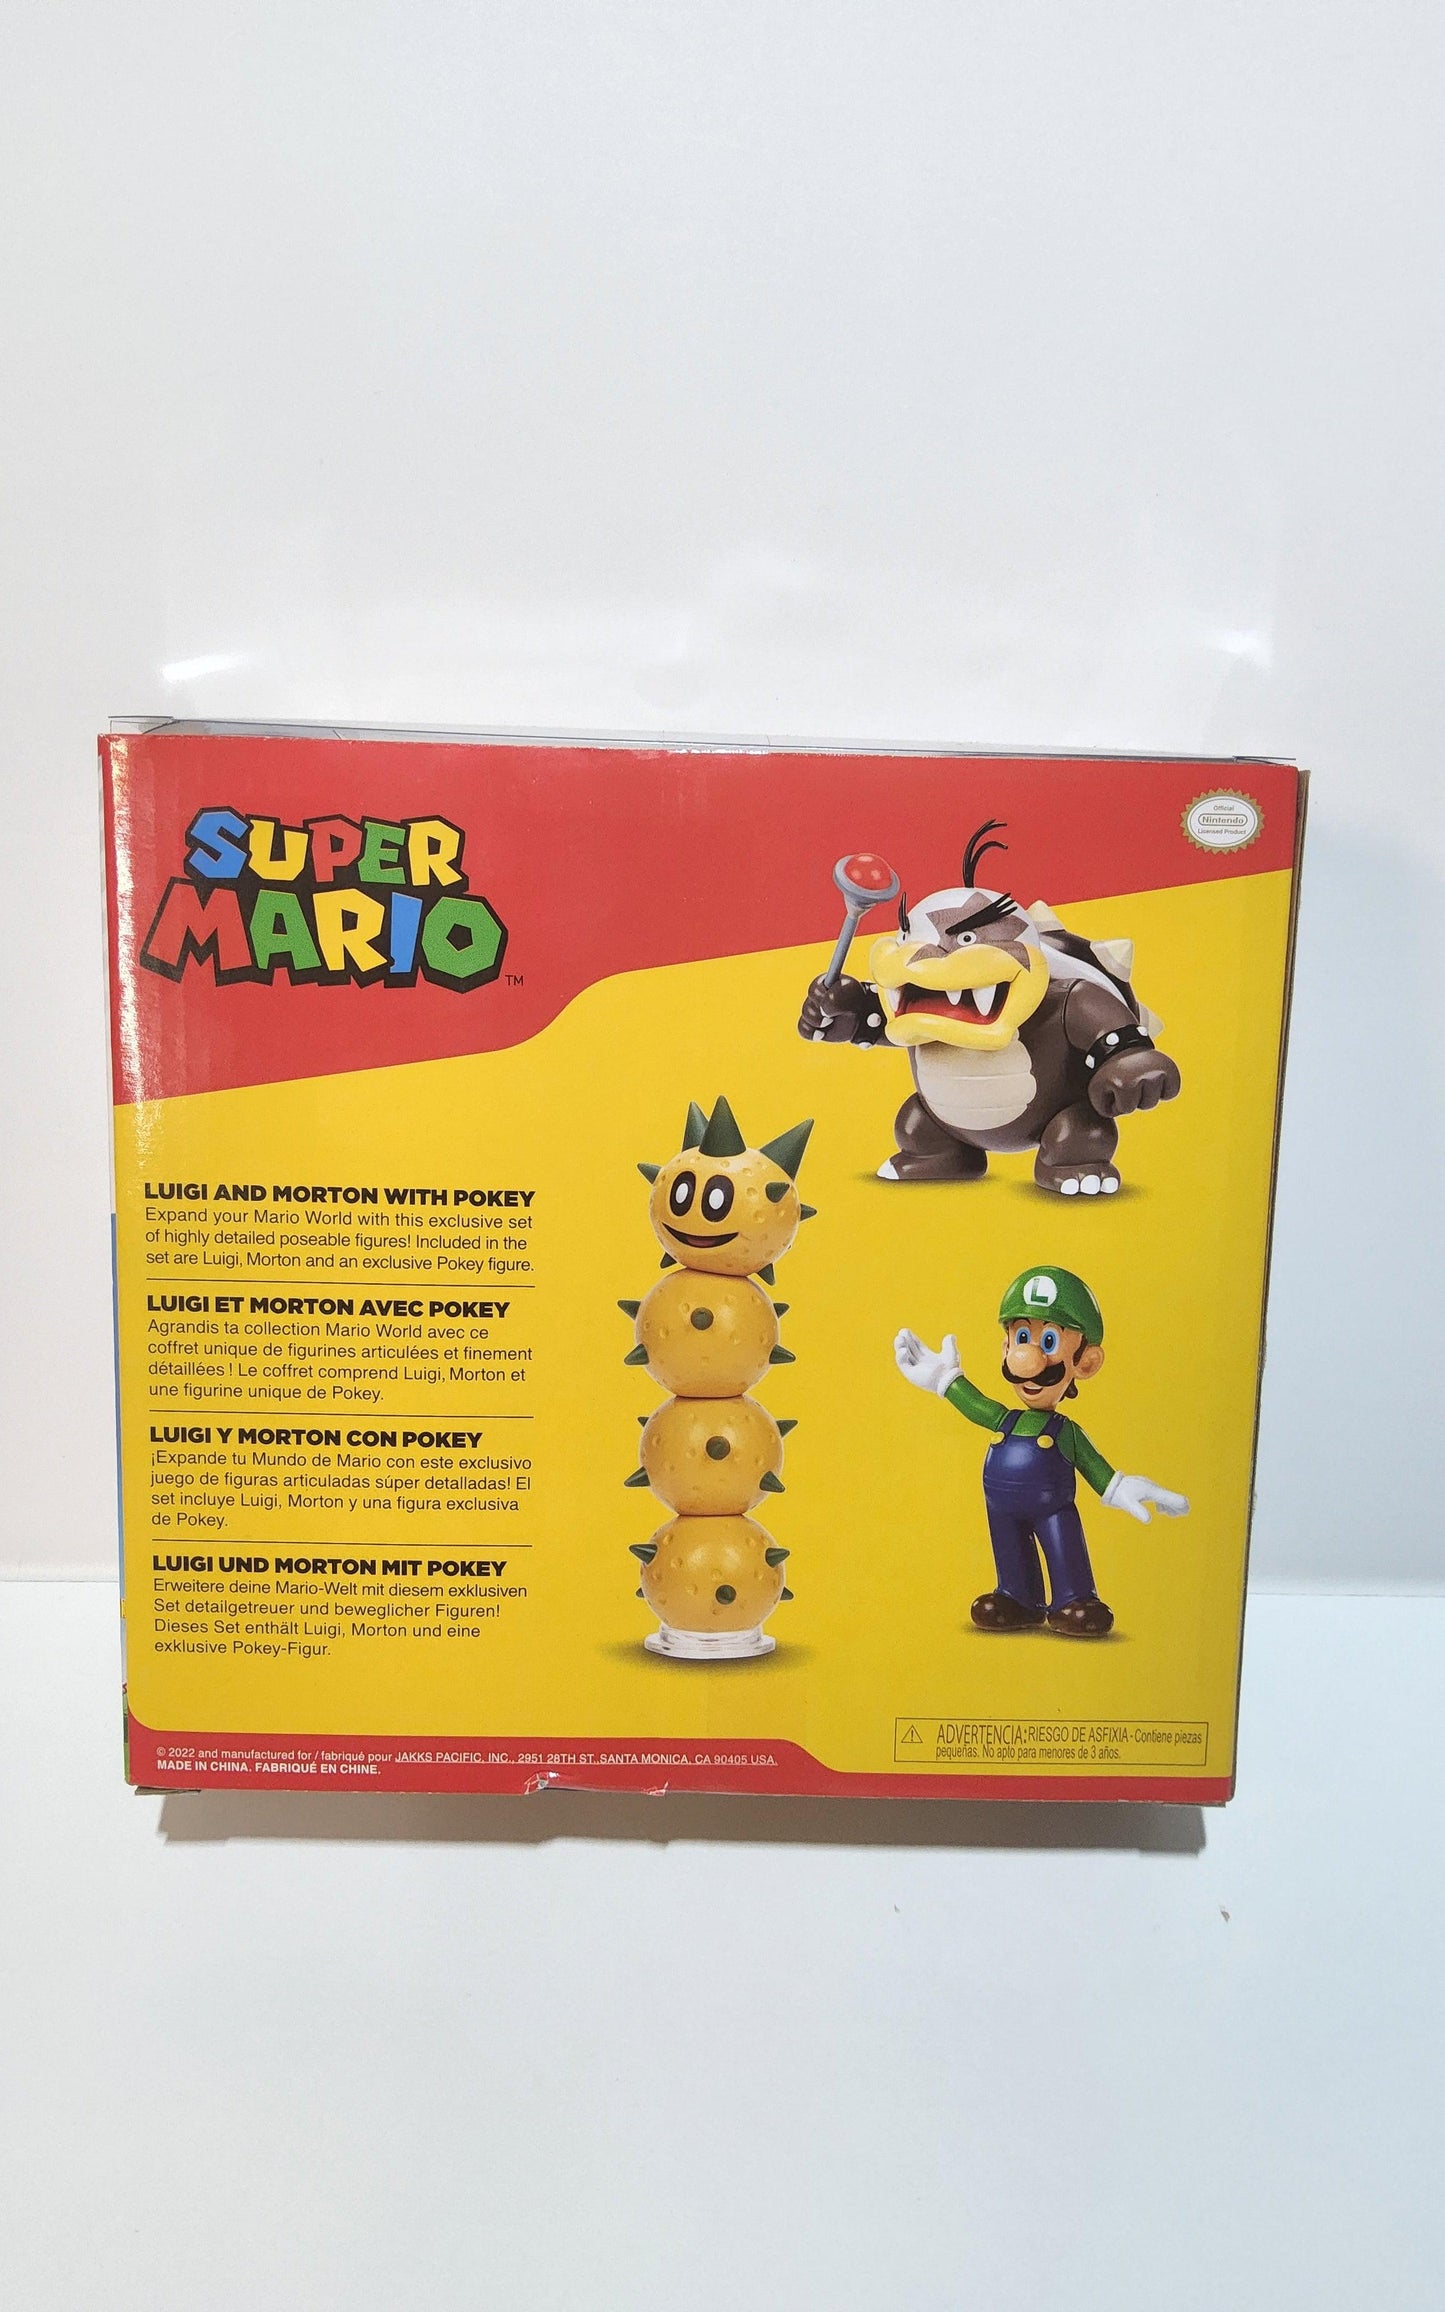 Super Mario Brothers Luigi and Morton With Pokey Accessory Playset - Logan's Toy Chest